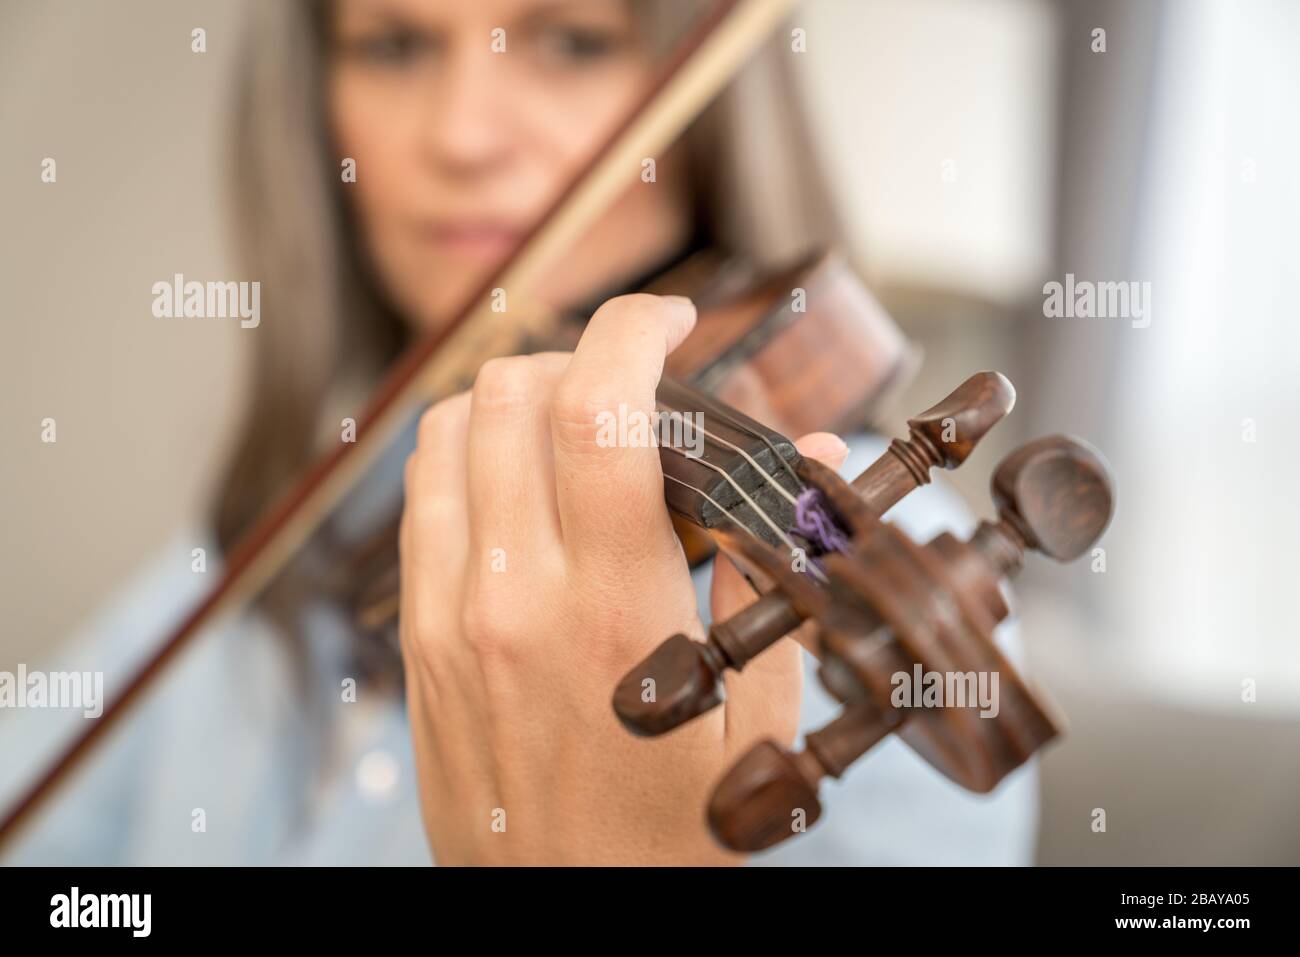 Close-up image of a woman playing violin. Shallow depth of field, focus on fingers Stock Photo